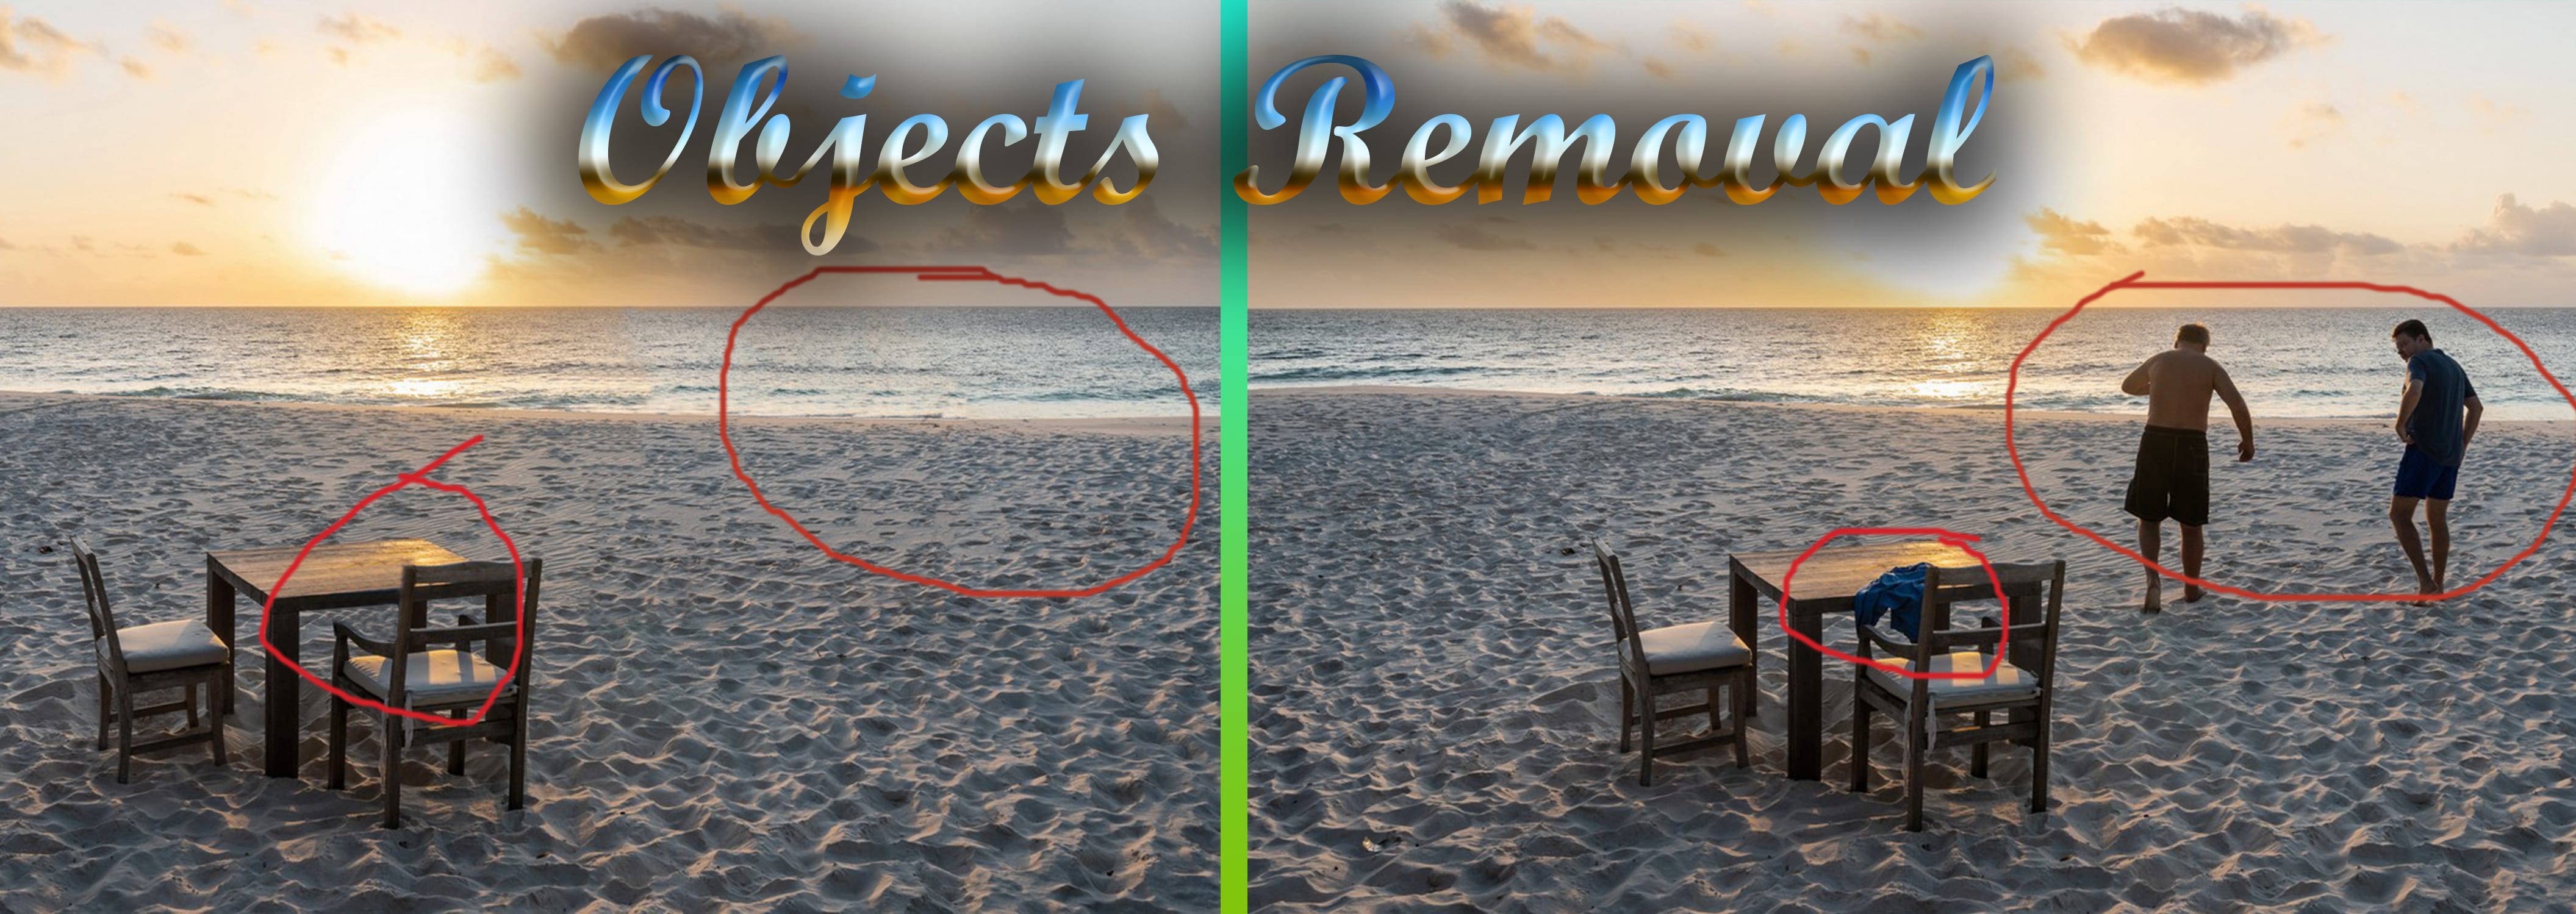 Do Background Removal And Photoshop Edits With Fast Delivery By